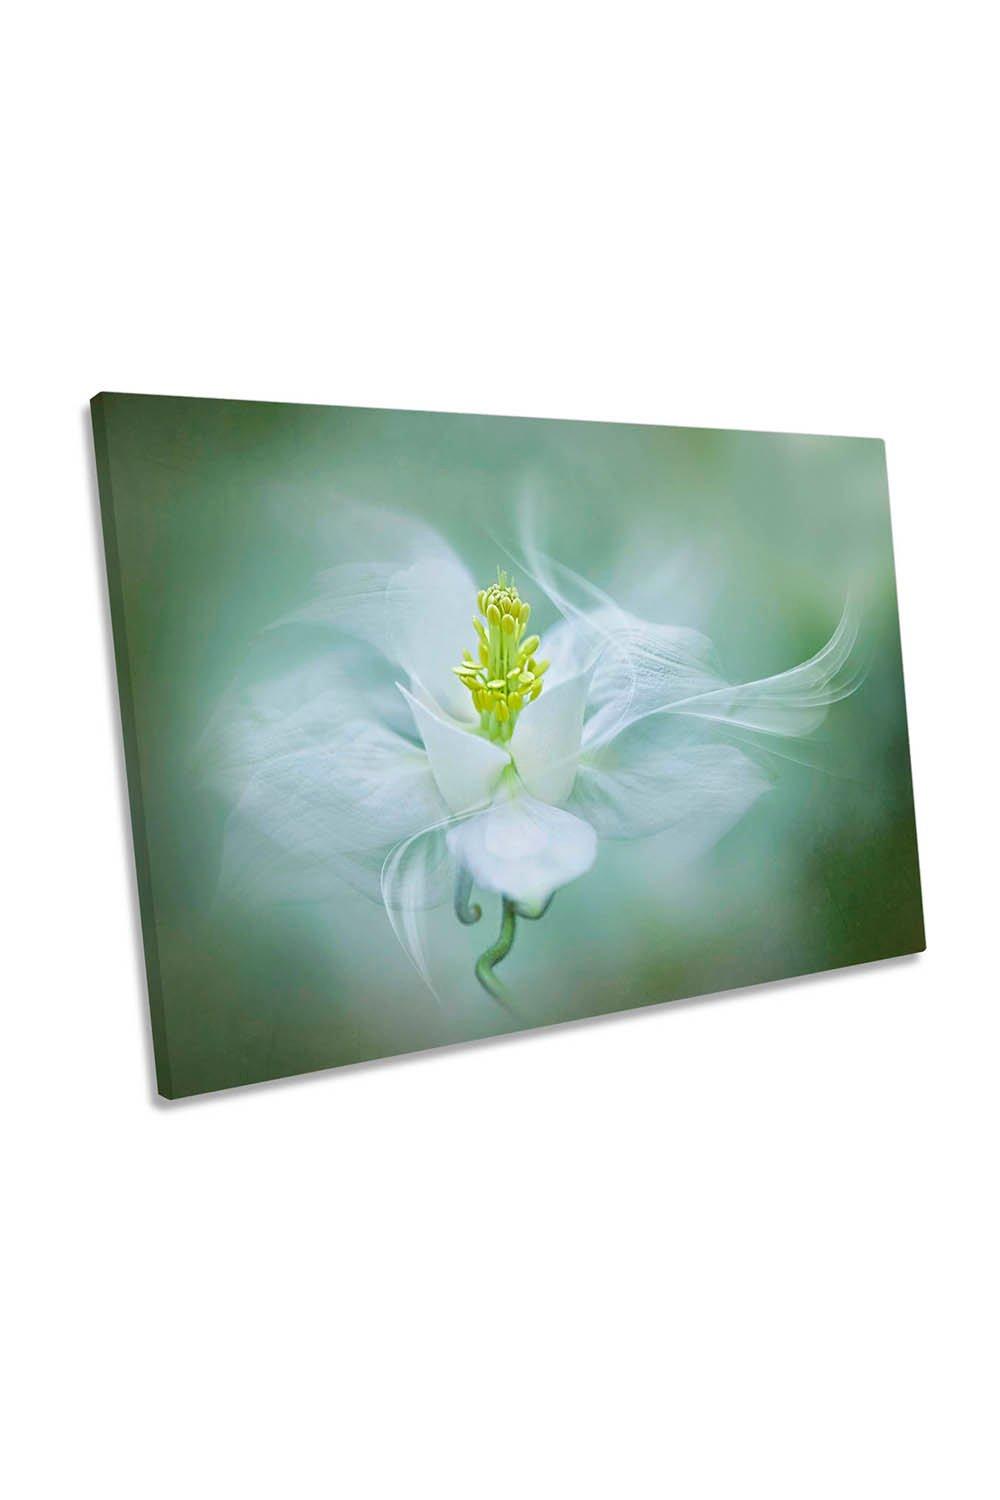 Mystical Flower Floral Green Canvas Wall Art Picture Print